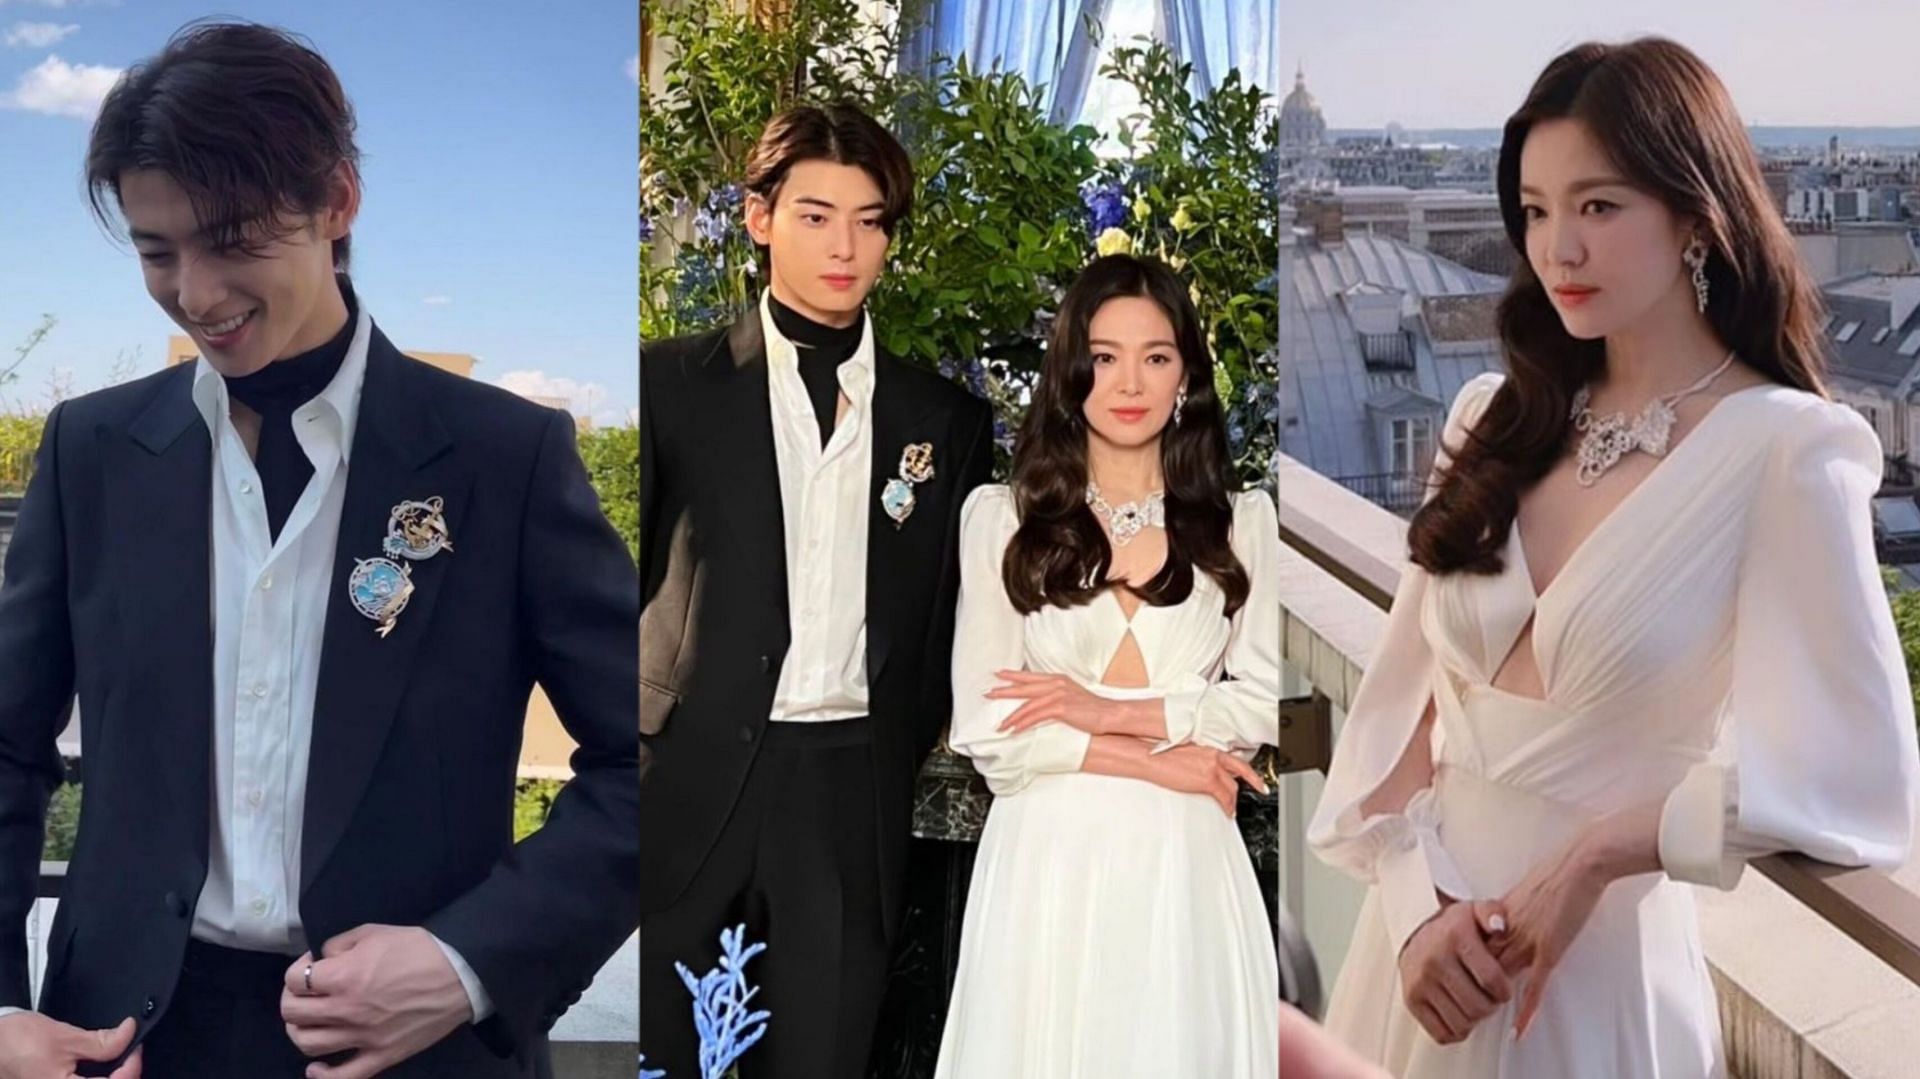 Prince and Princess of Korea: Cha Eun-woo and Song Hye-kyo stun fans with  their appearance at the Chaumet Event